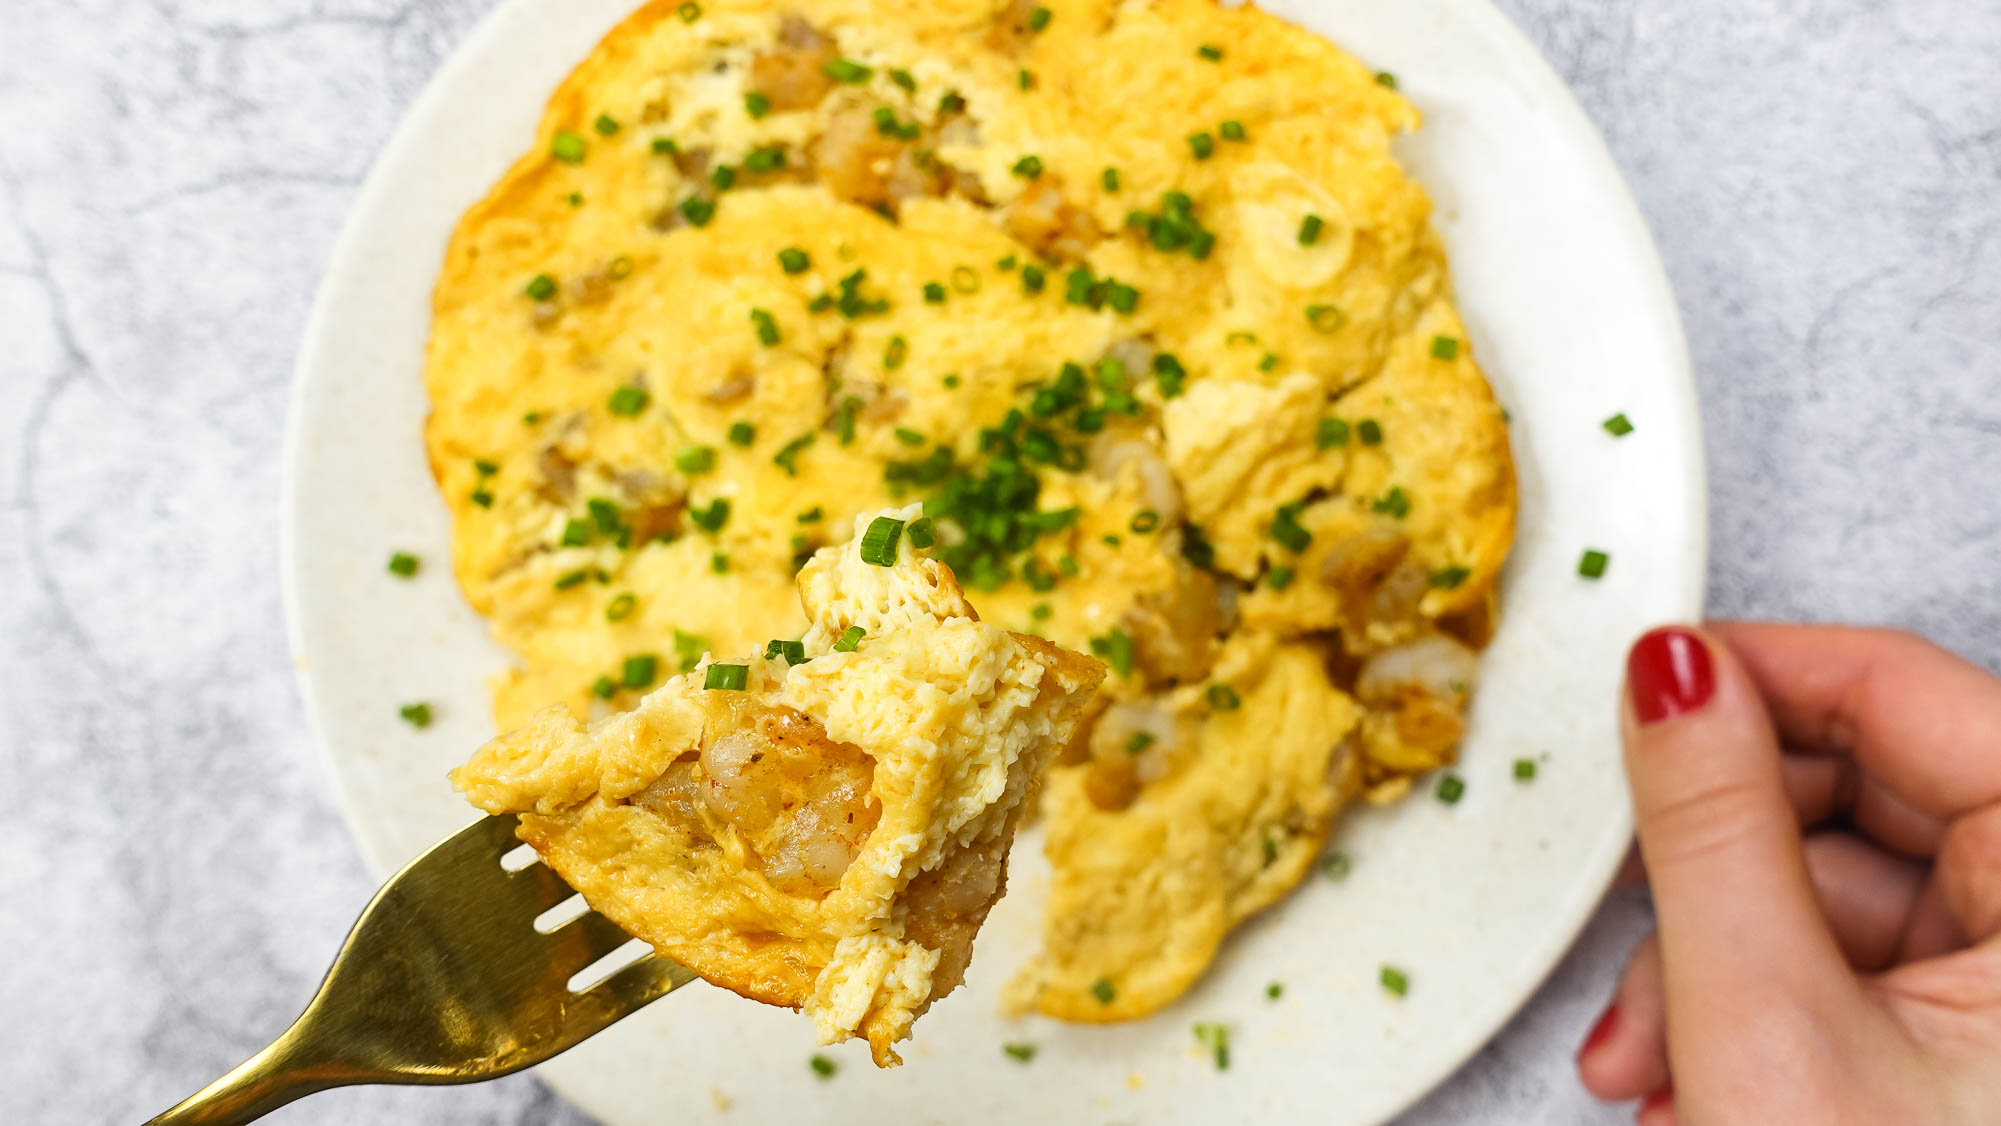 Shrimp Omelette on a plate with green onion and a fork full of omelette in one hand.